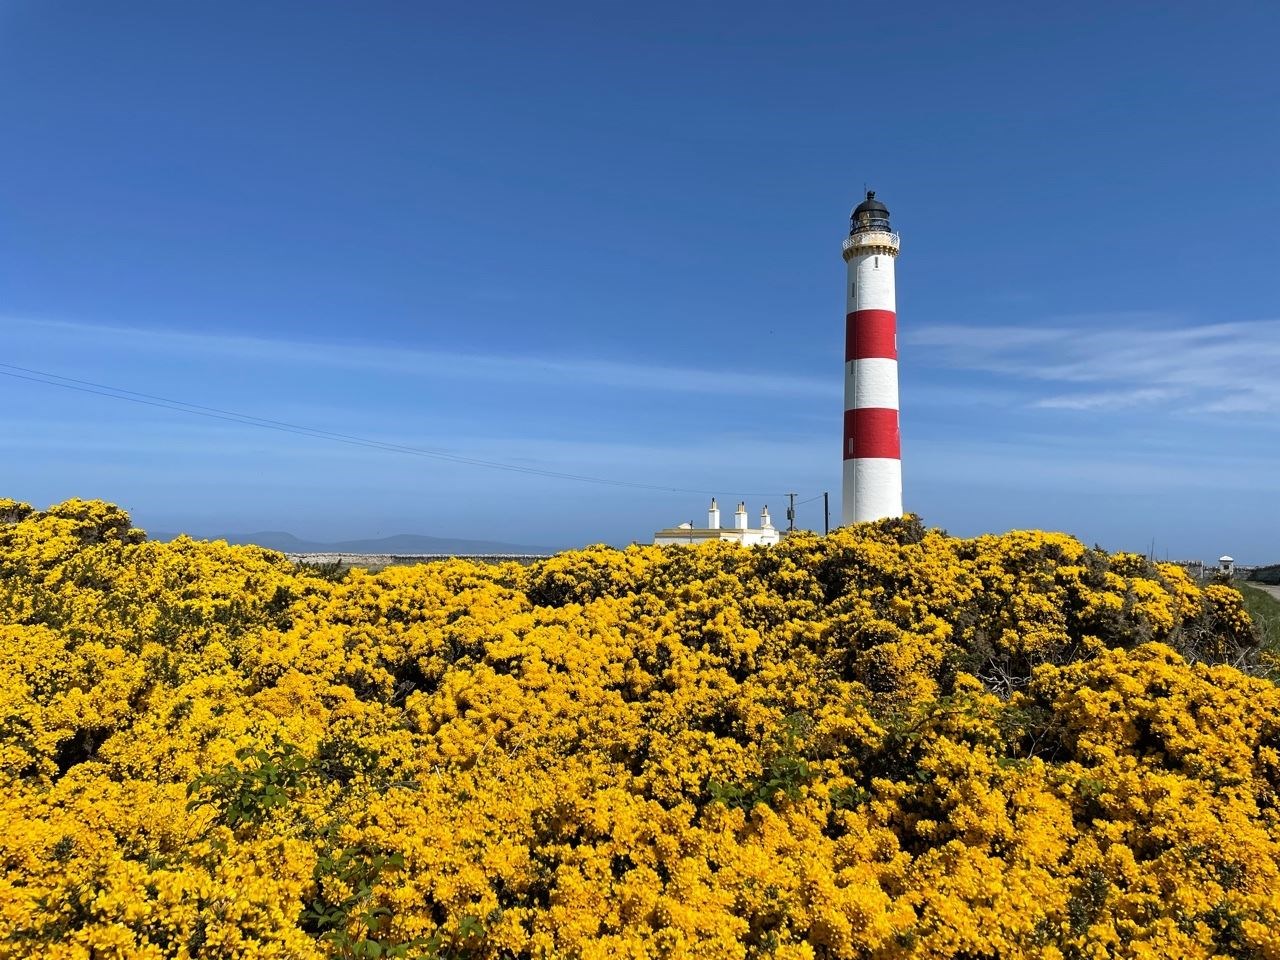 Tarbatness lighthouse in a sea of gorse captured by David McAllister.